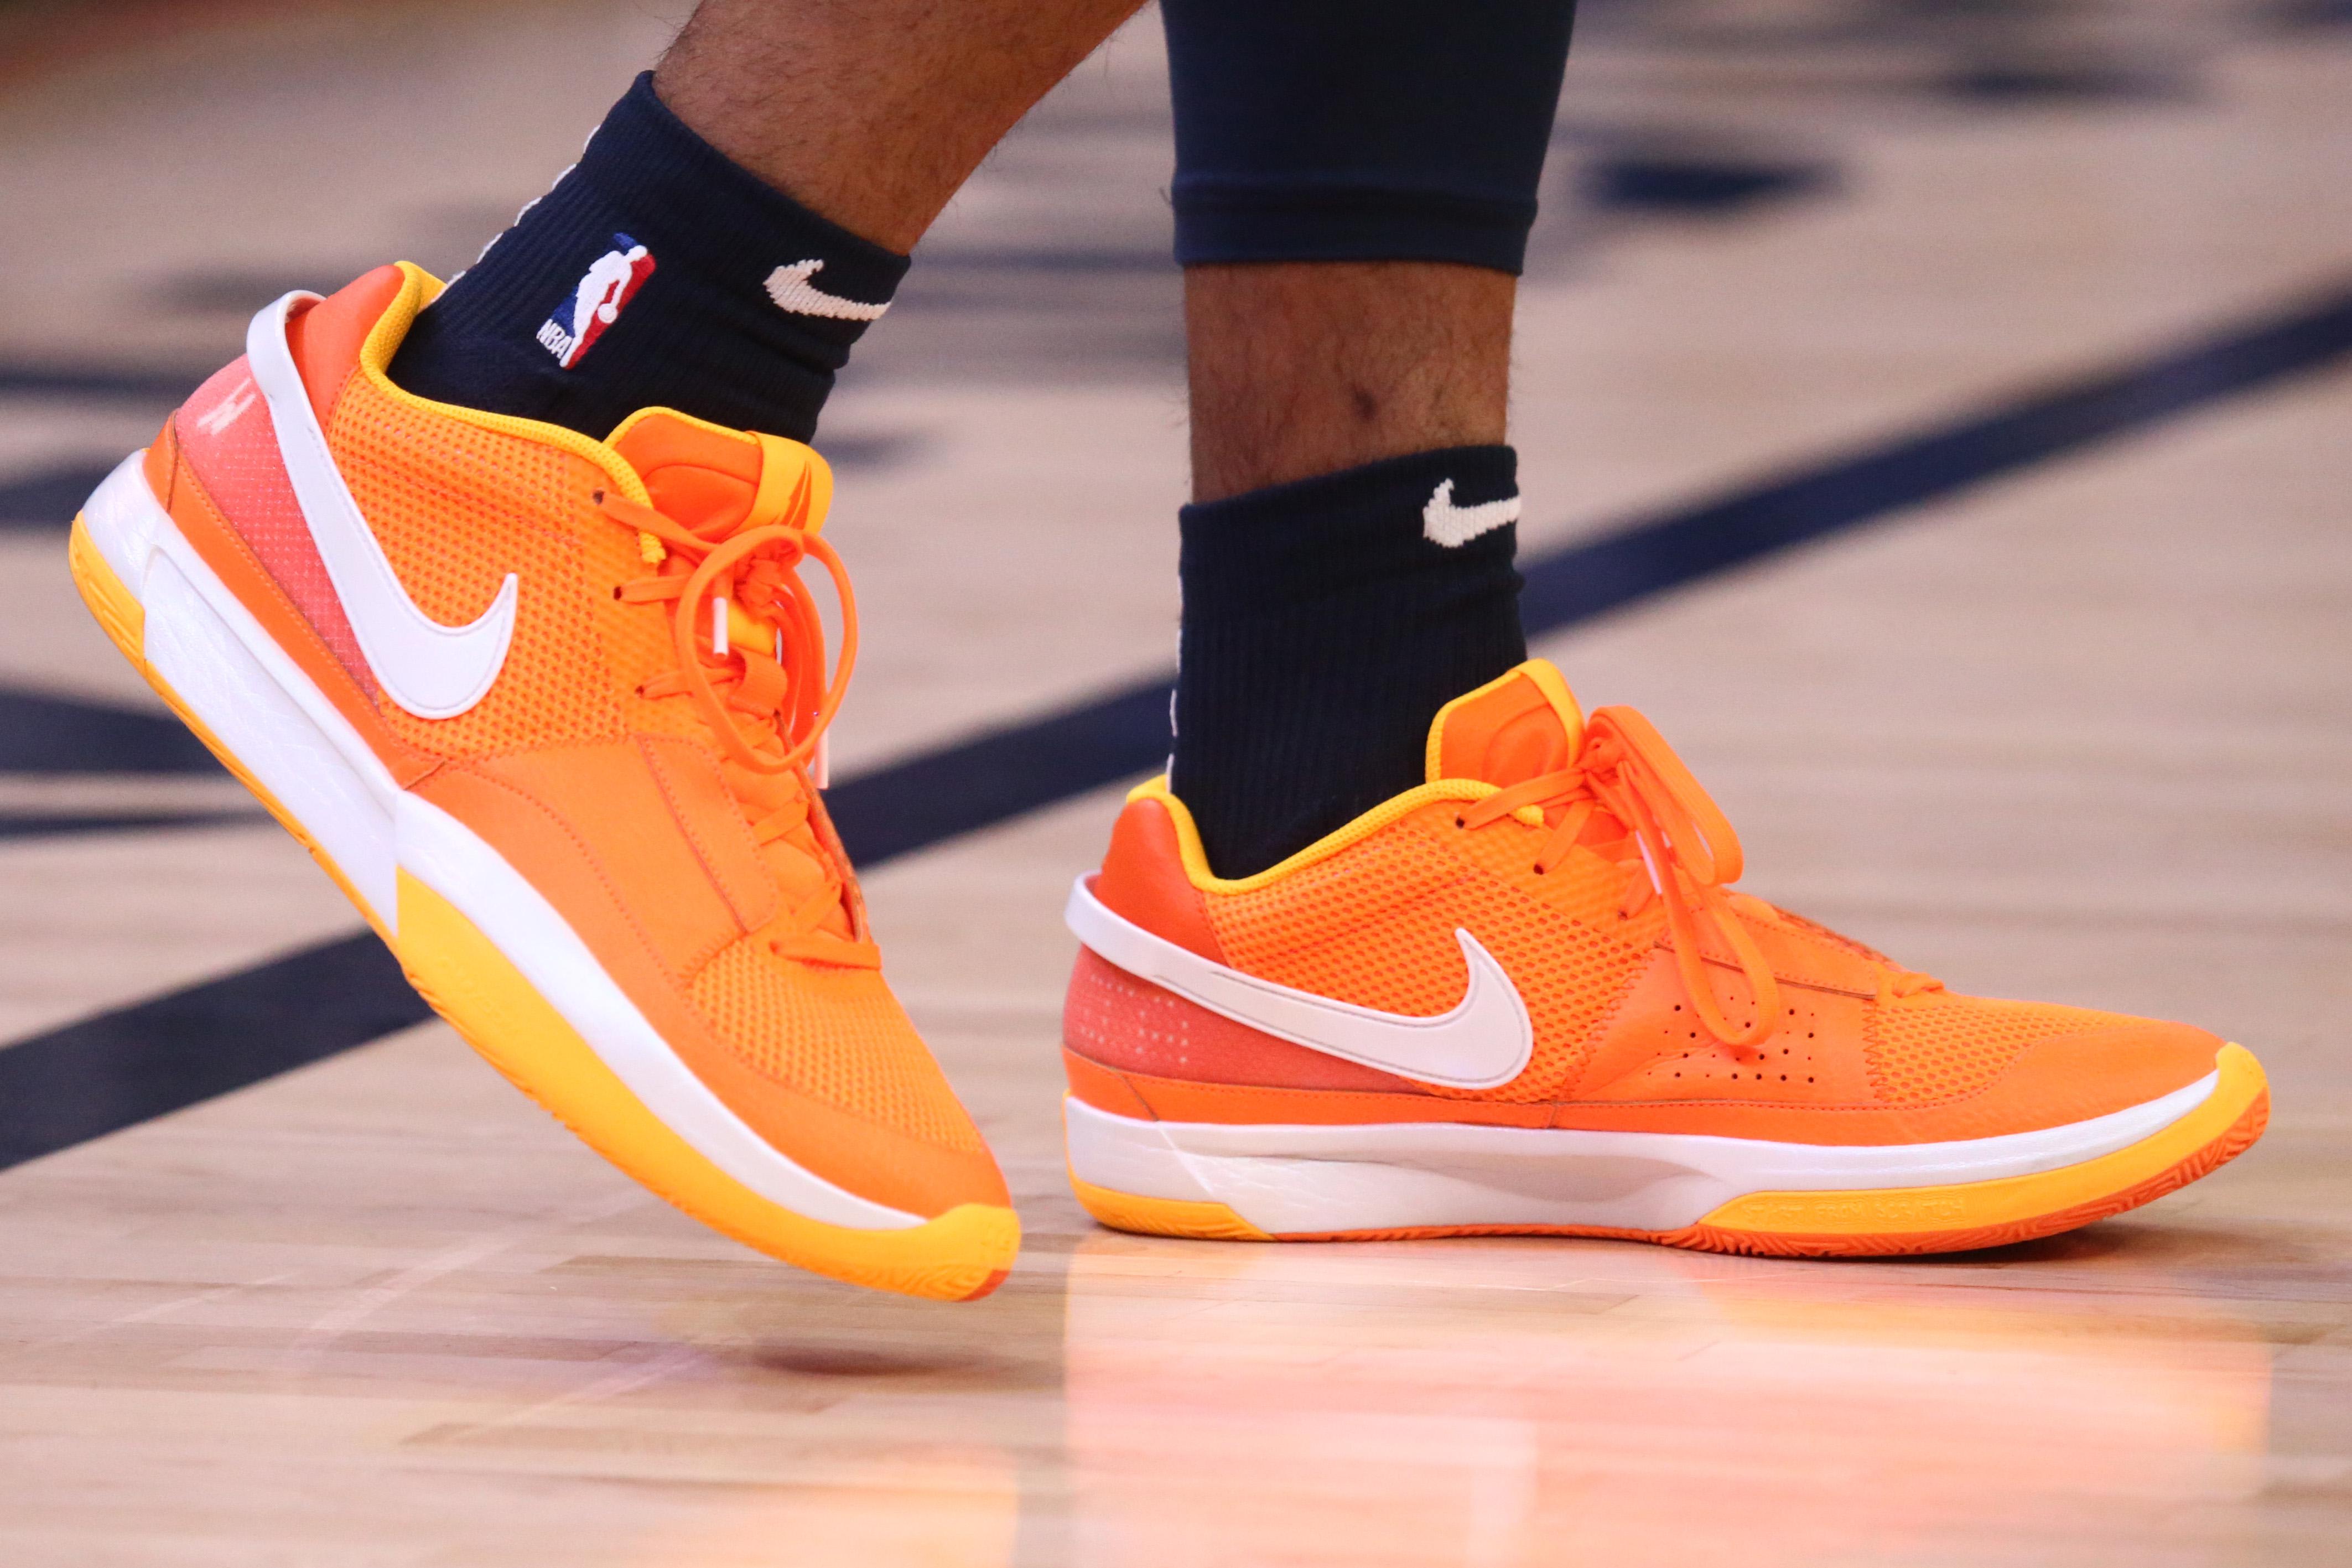 Side view of Ja Morant's orange and white Nike sneakers.